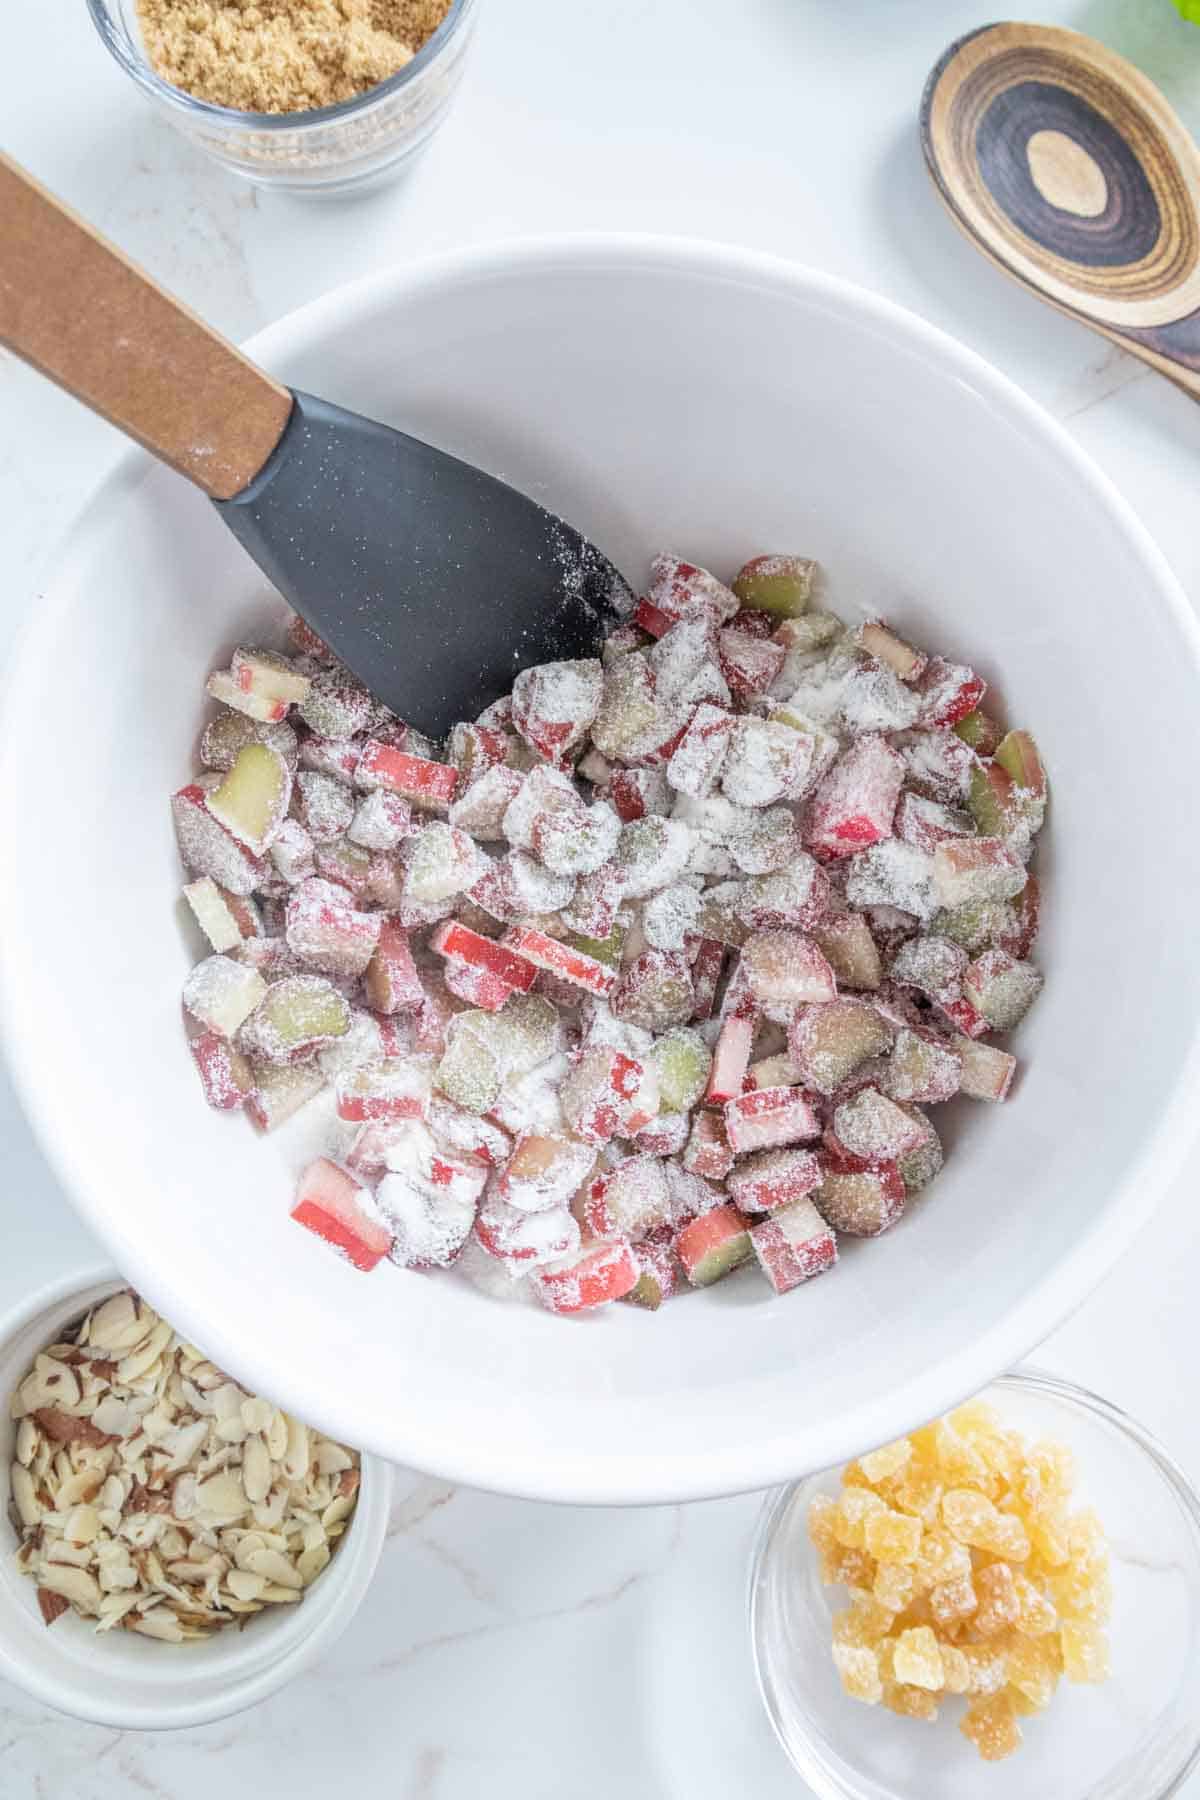 A bowl of chopped rhubarb mixed with sugar, with a spatula, surrounded by ingredients like almonds and crystallized ginger on a marble surface.